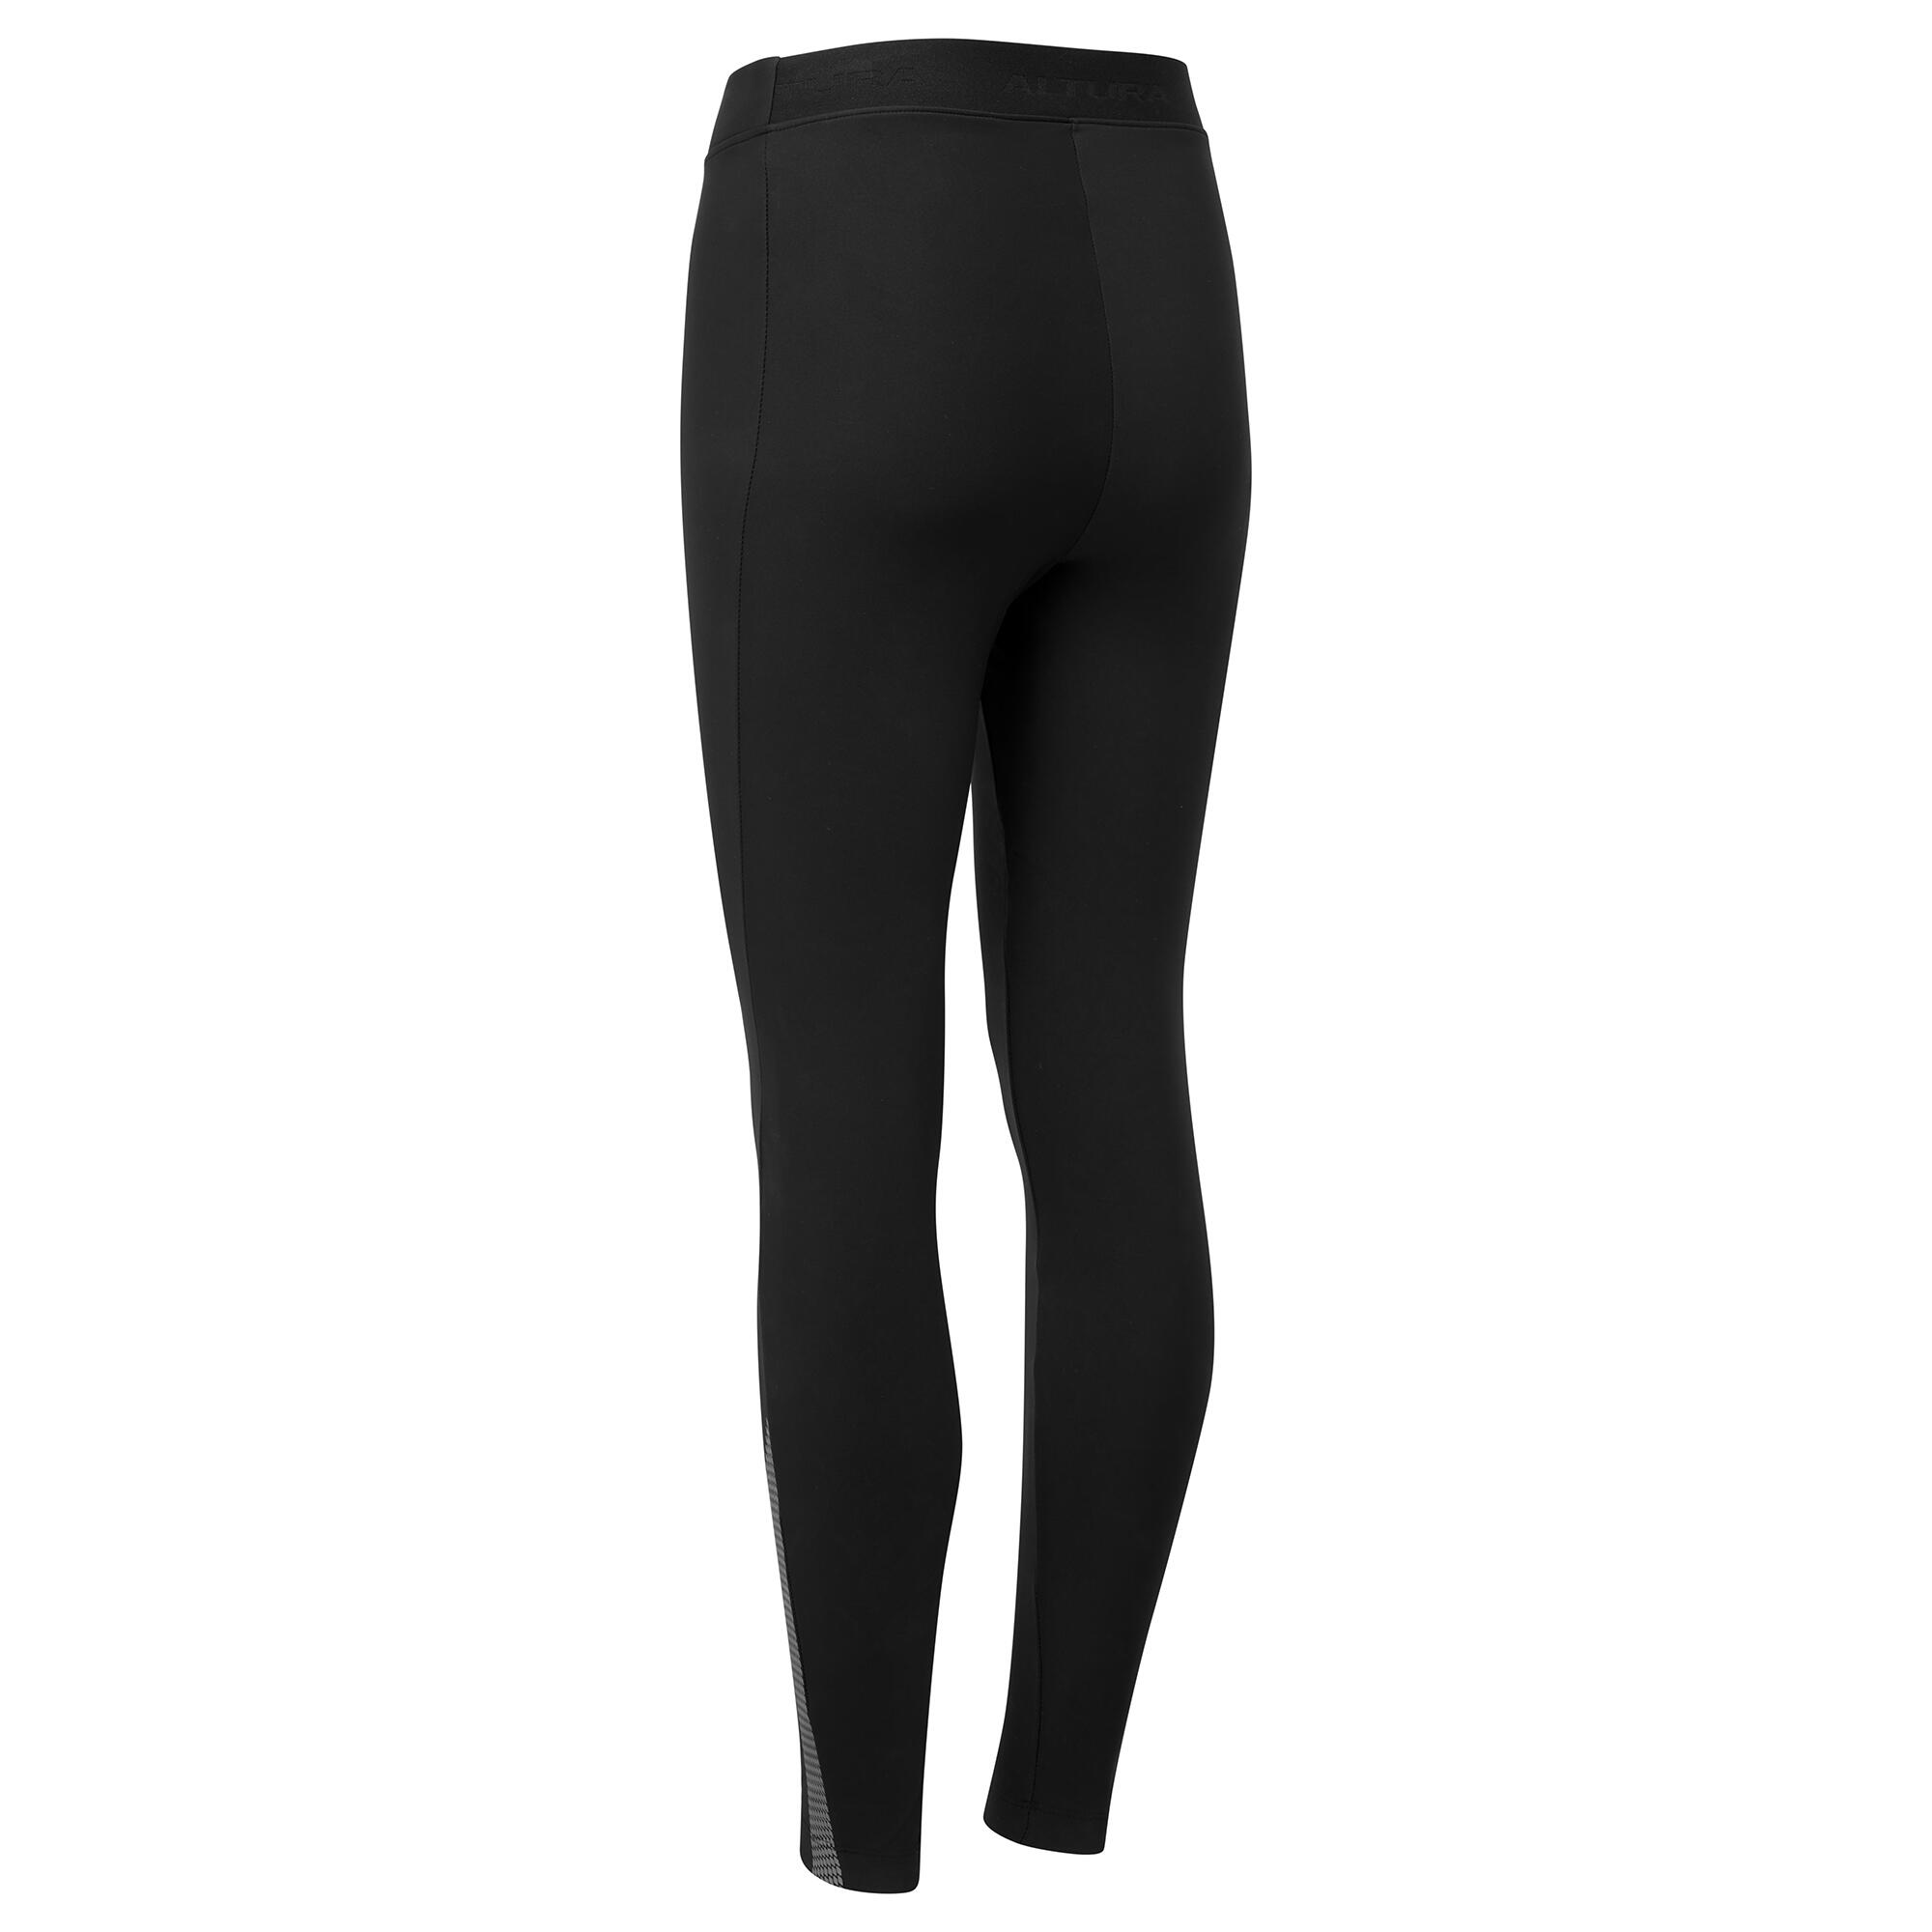 Grid Women's Cruiser Water Resistant Tights 5/5